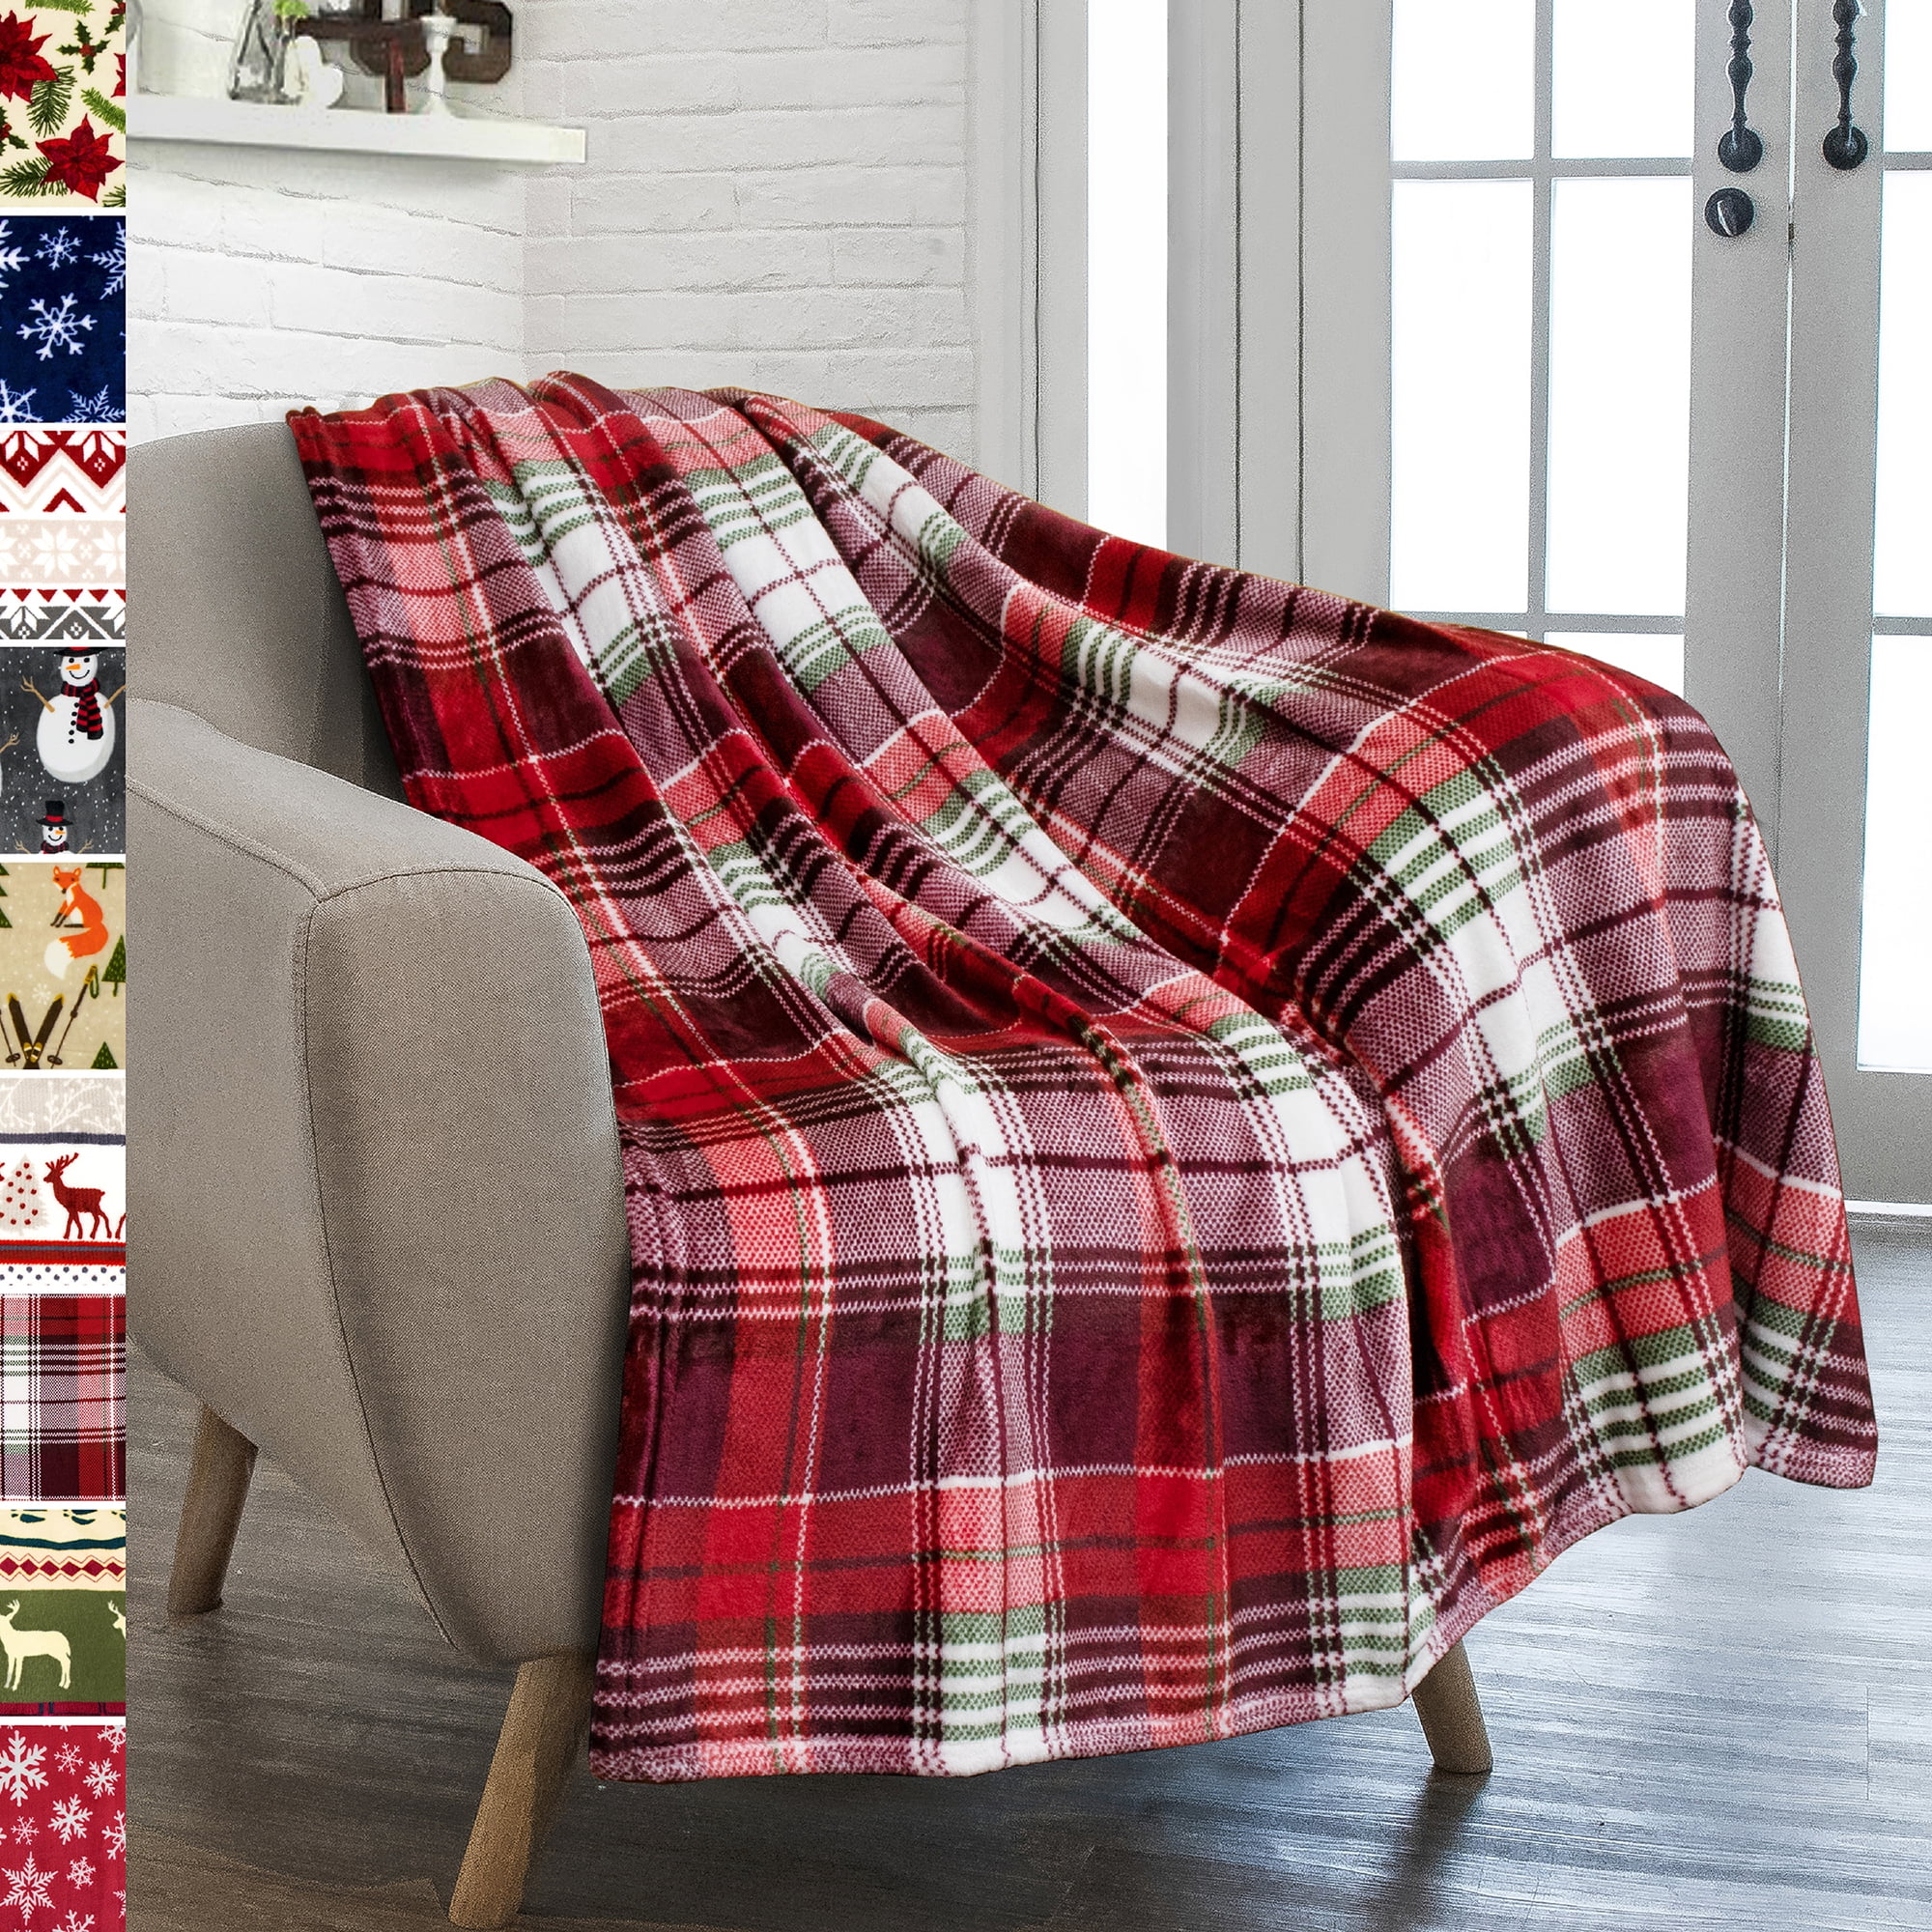 Holiday Time Plush Throw Racer Red 50 x 60 inches Blanket 